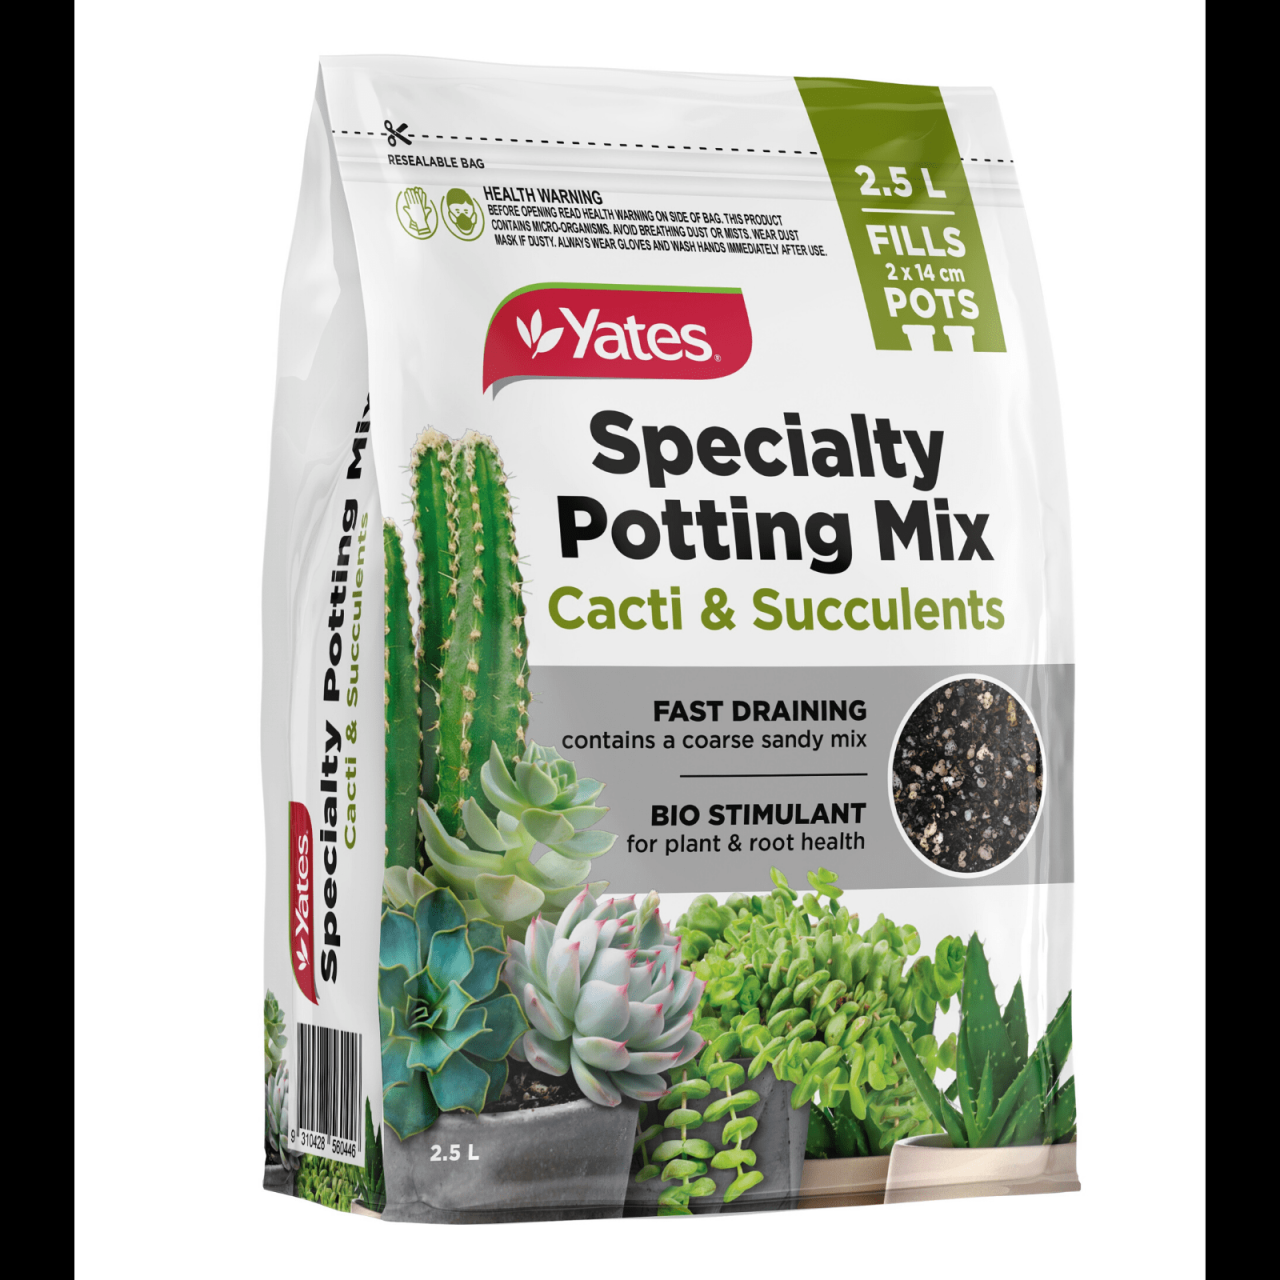 Hanging Plants Indoor | Bunnings Cacti Mix: The Ultimate Guide for Healthy Cacti